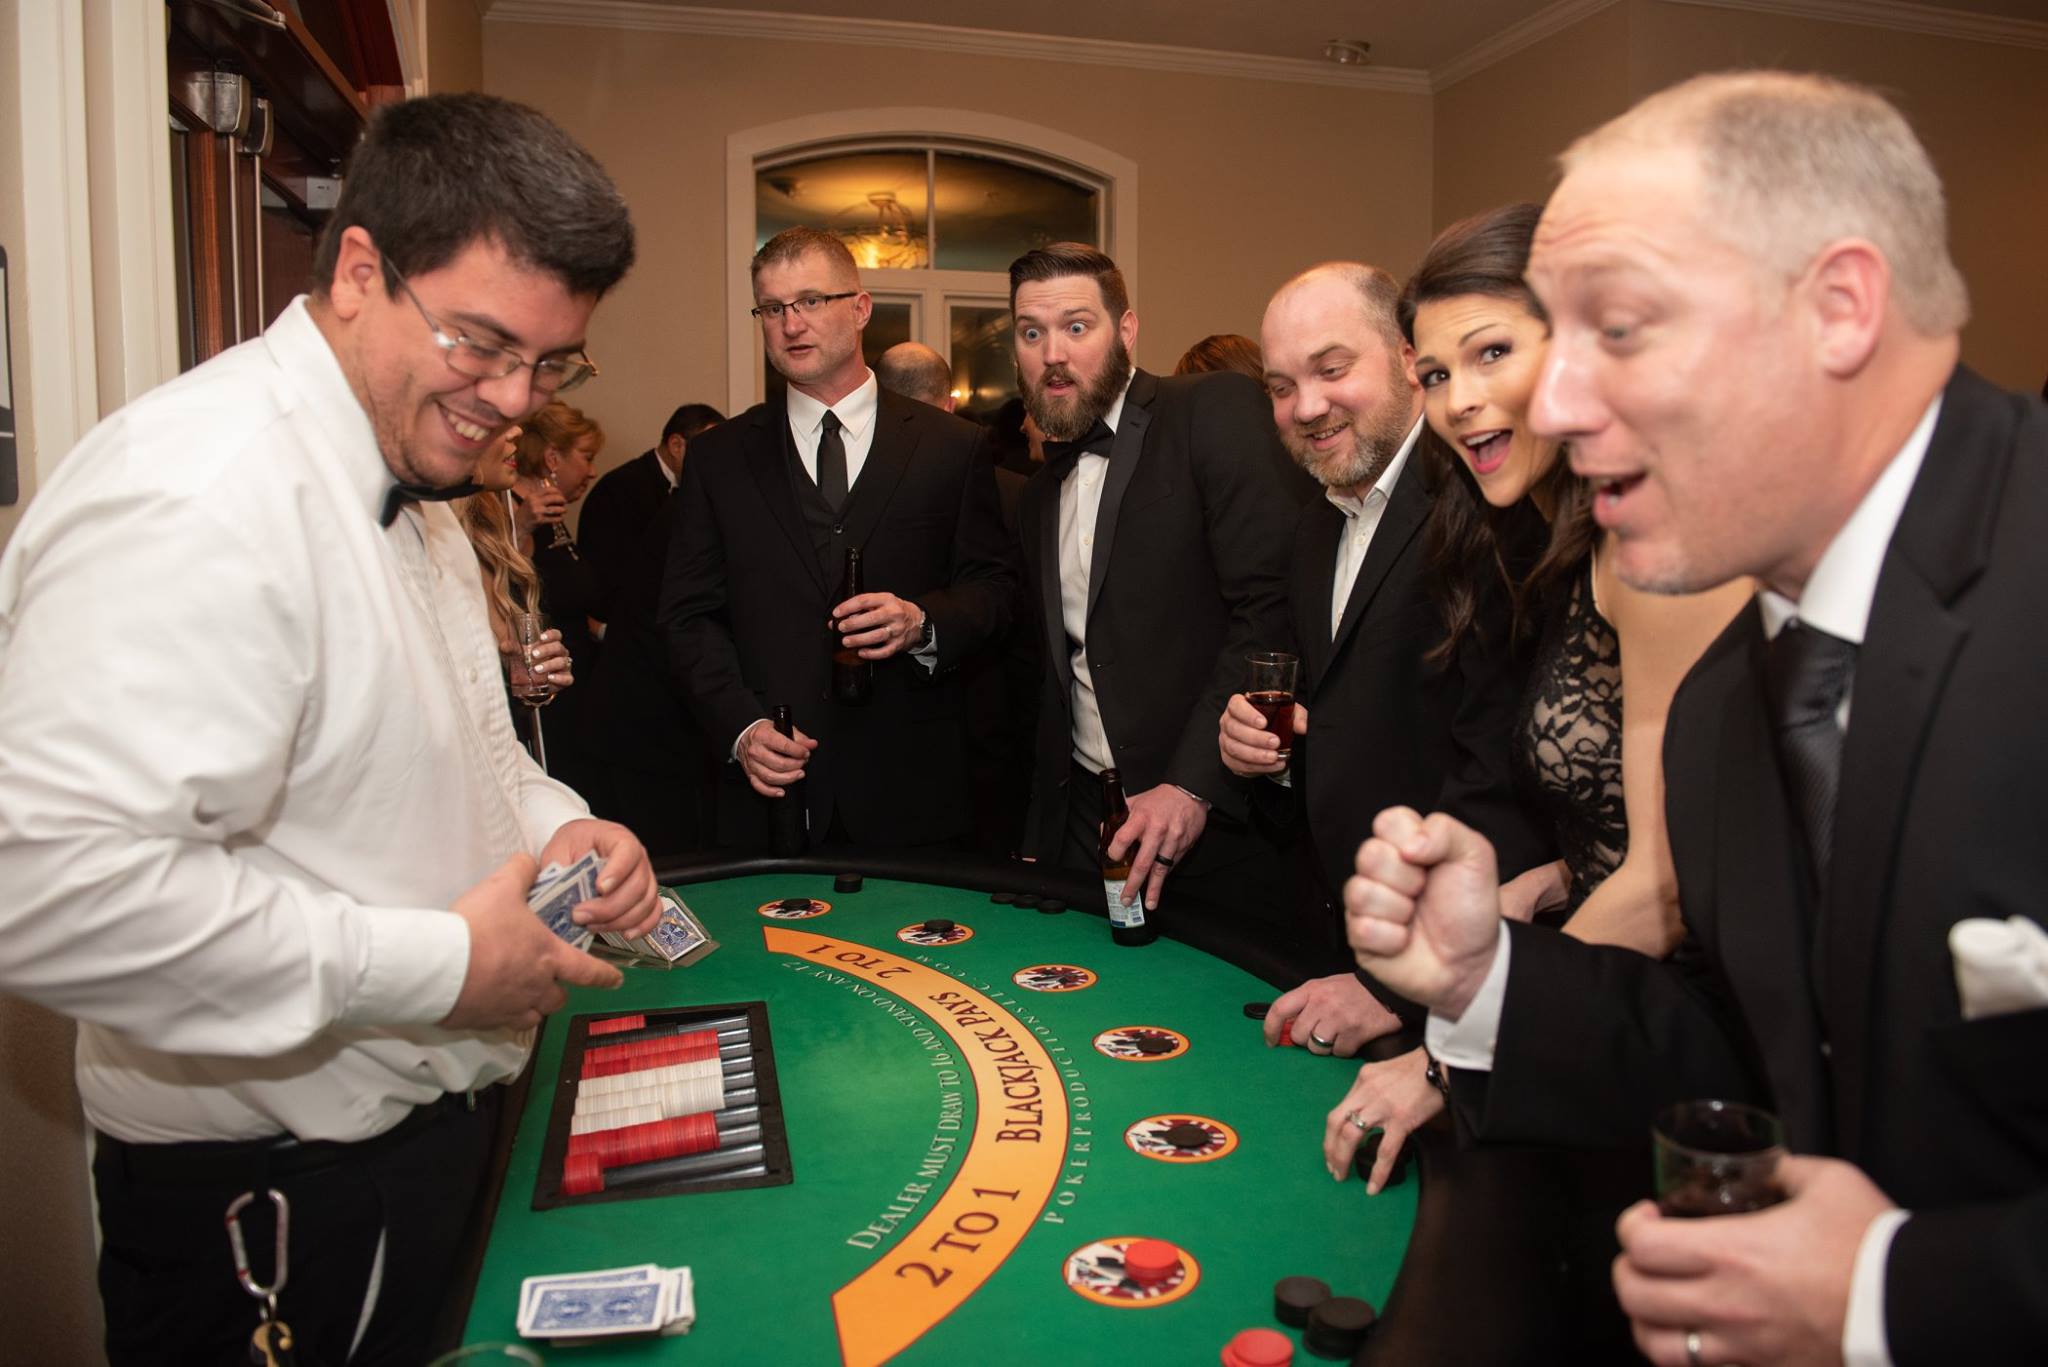 Players at the black jack table